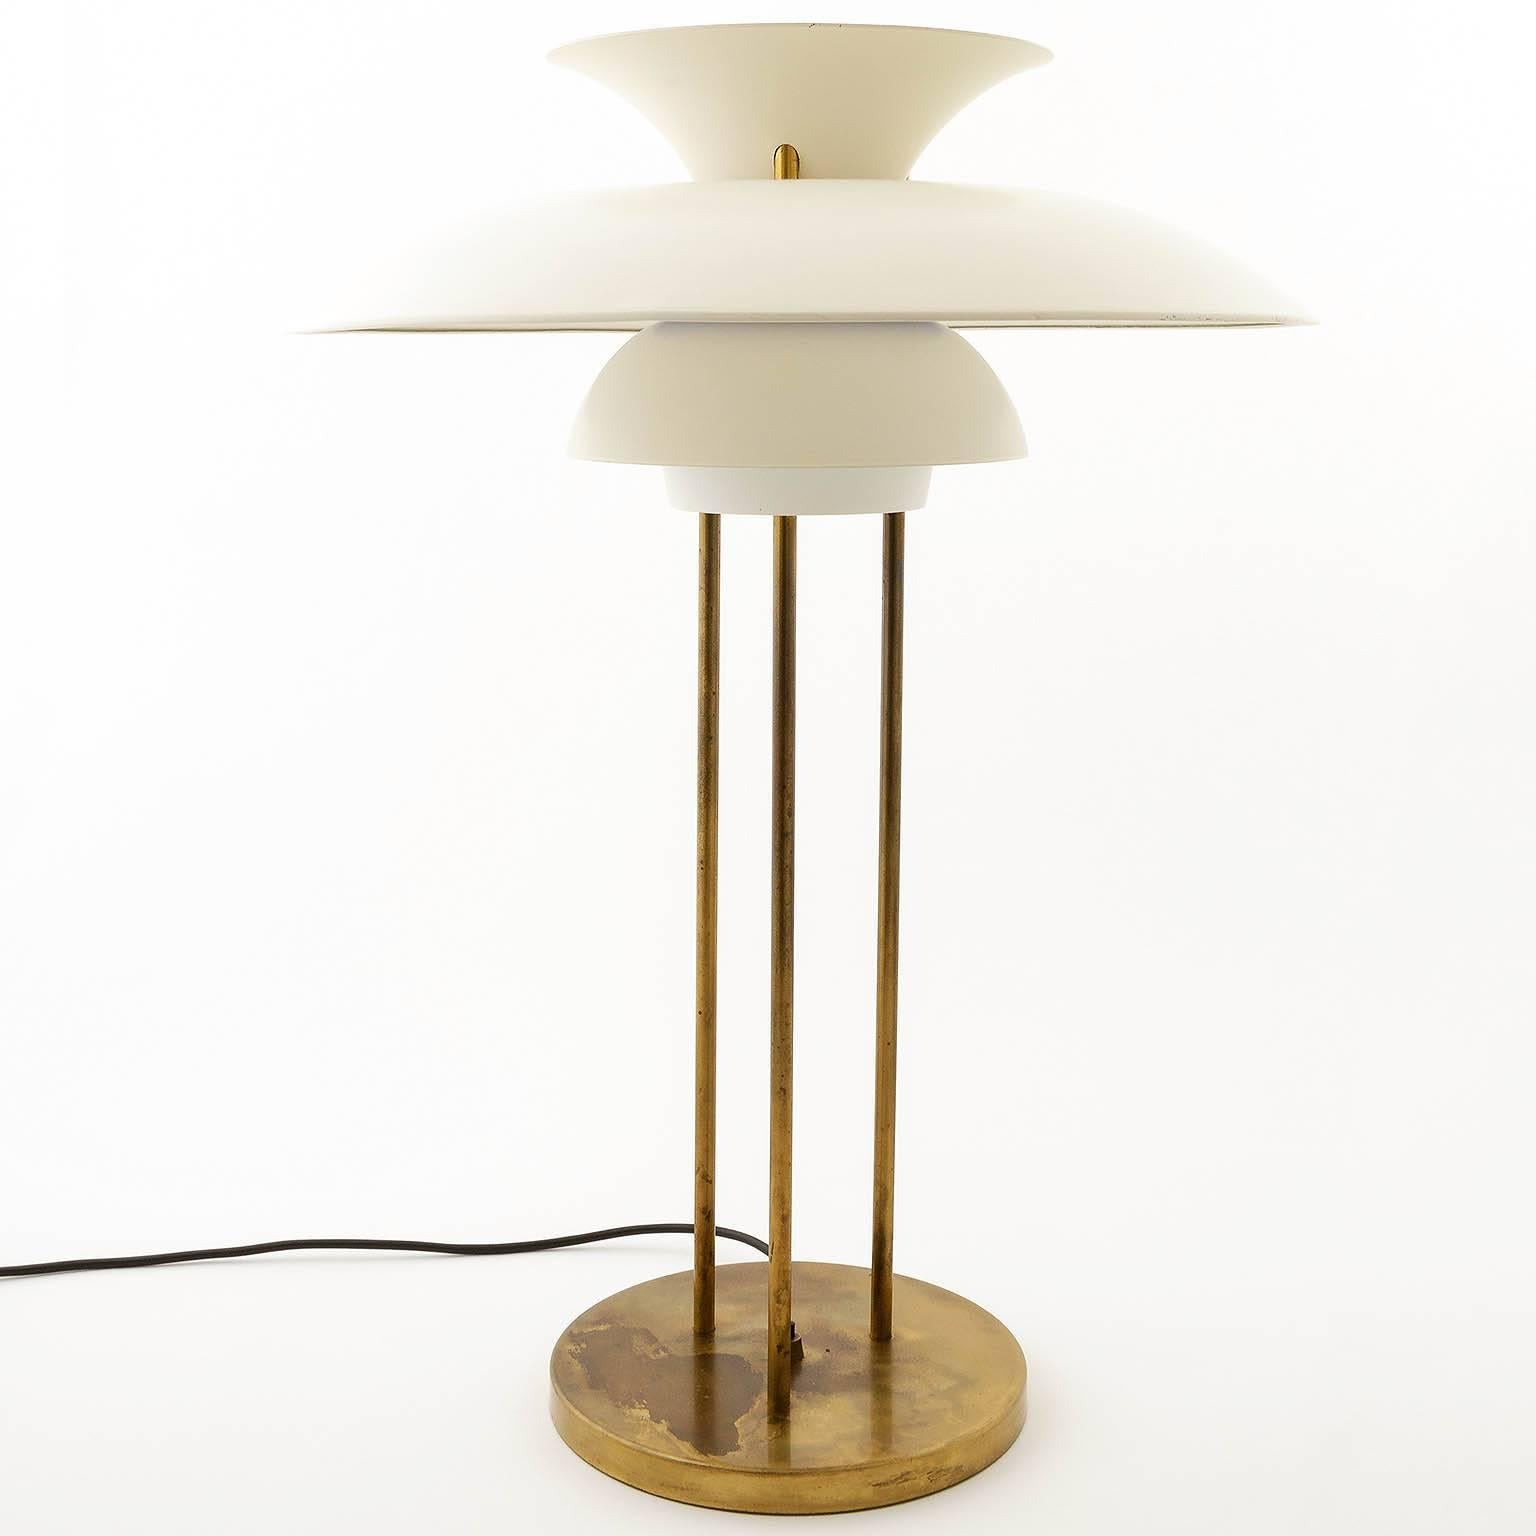 A modernist table lamp PH5 by Poul Henningsen for Louis Poulsen, Denmark, designed in 1962 and manufactured in the 1960s. It is made of patinated brass and lacquered metal. A rare model with in nice vintage condition.